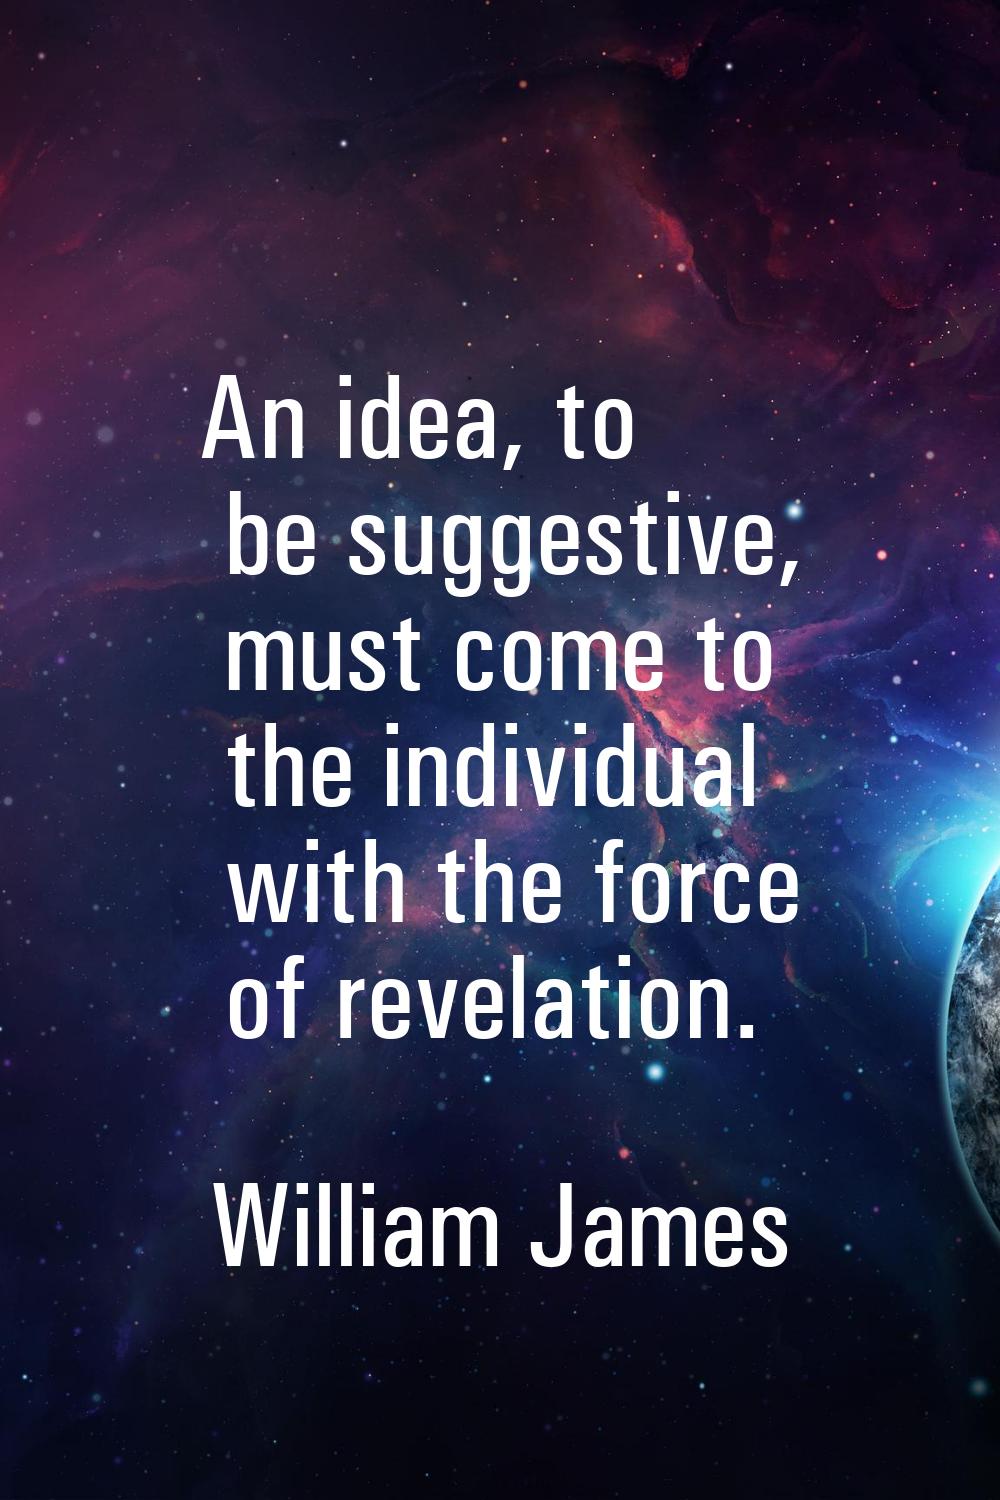 An idea, to be suggestive, must come to the individual with the force of revelation.